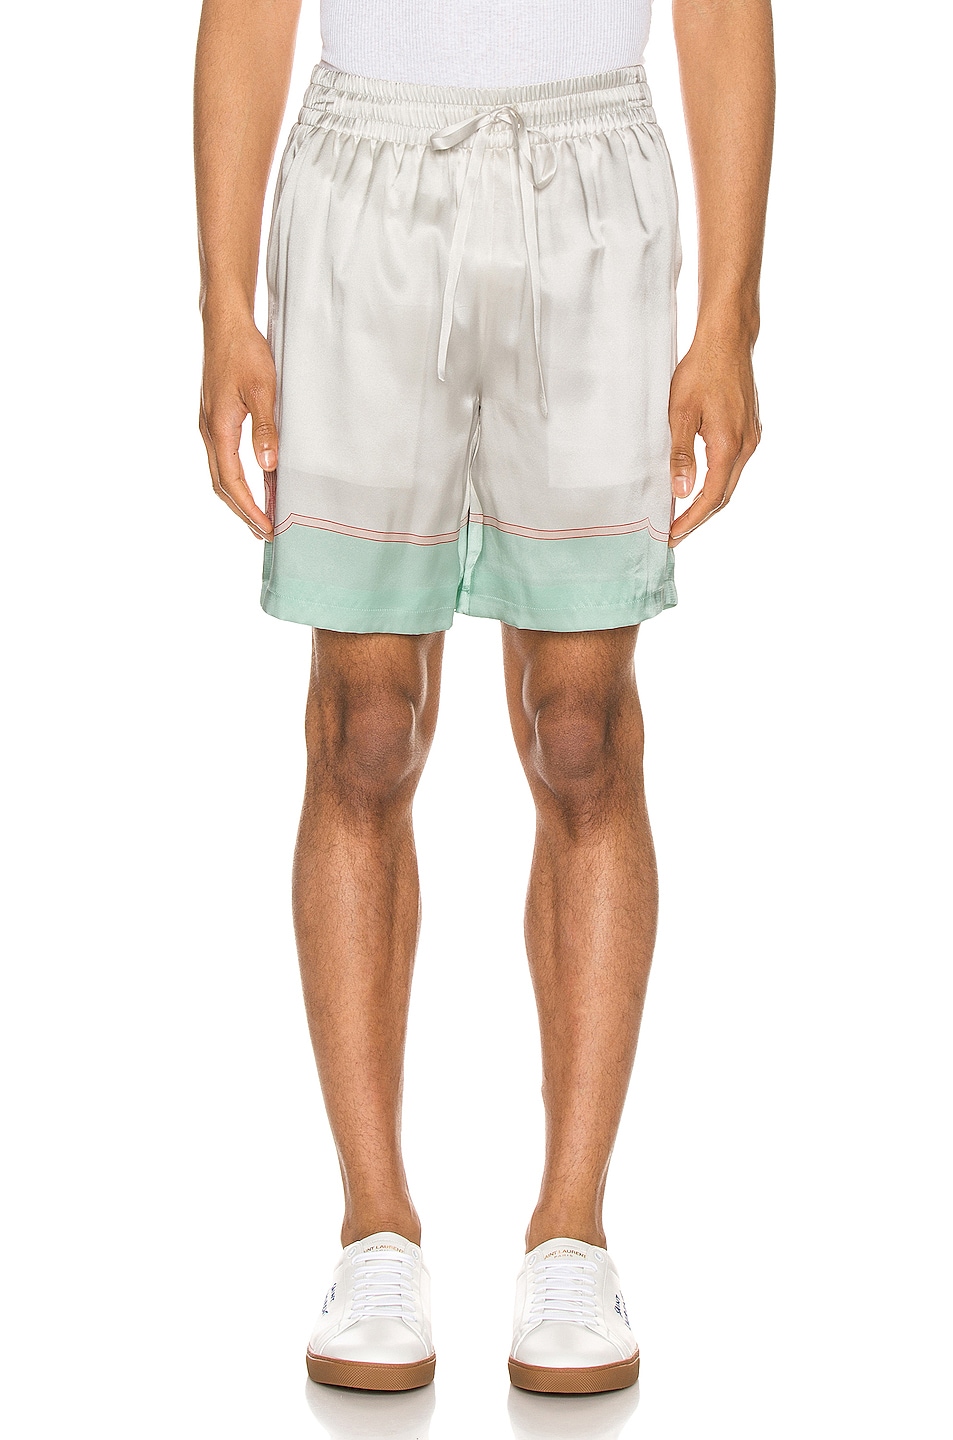 Image 1 of Casablanca Printed Shorts in Les Coquillages Mint